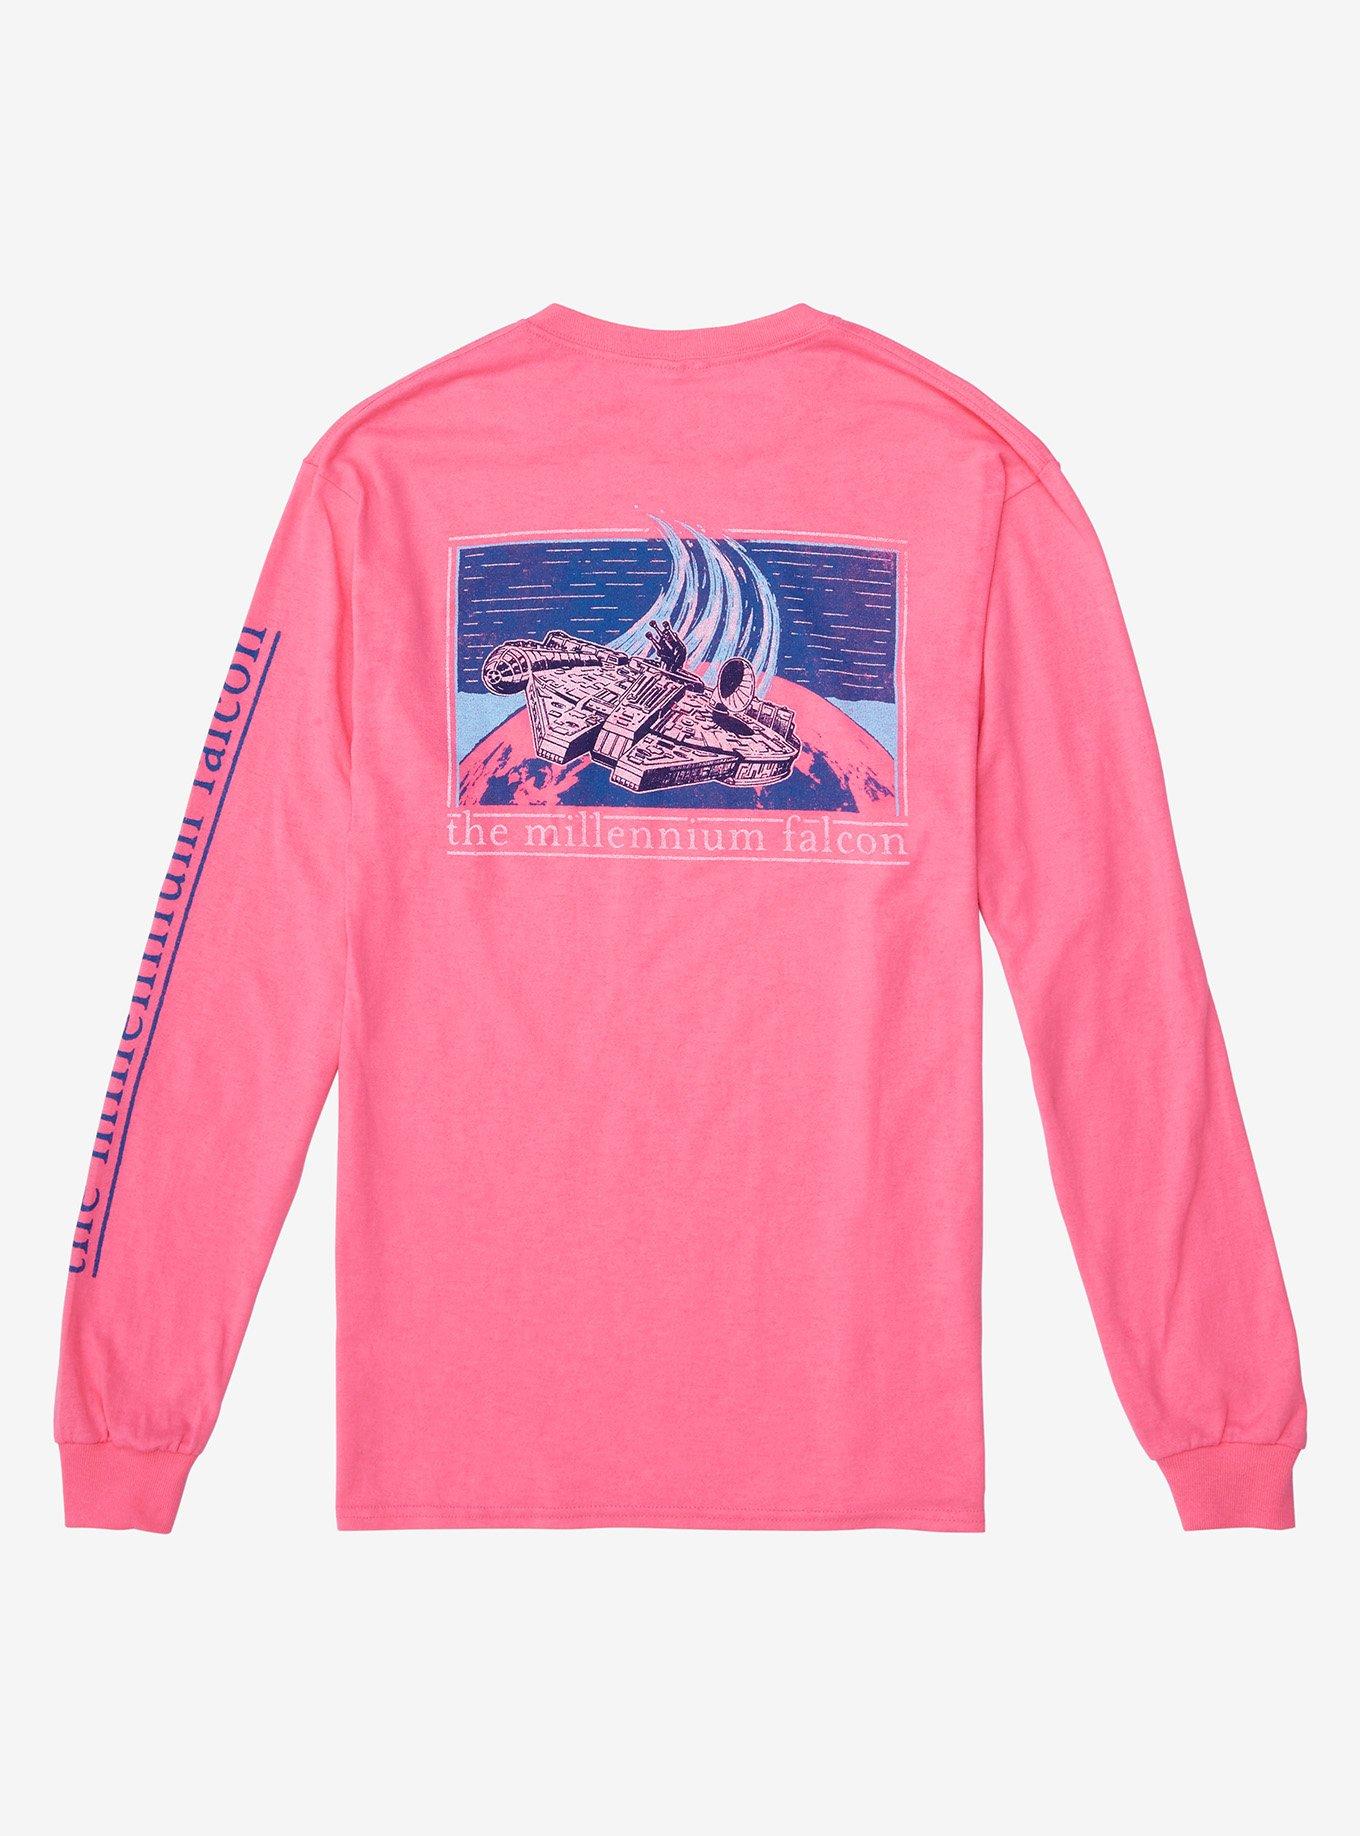 Star Wars Millennium Falcon Distressed Long Sleeve T-Shirt - BoxLunch Exclusive, LIGHT PINK, alternate